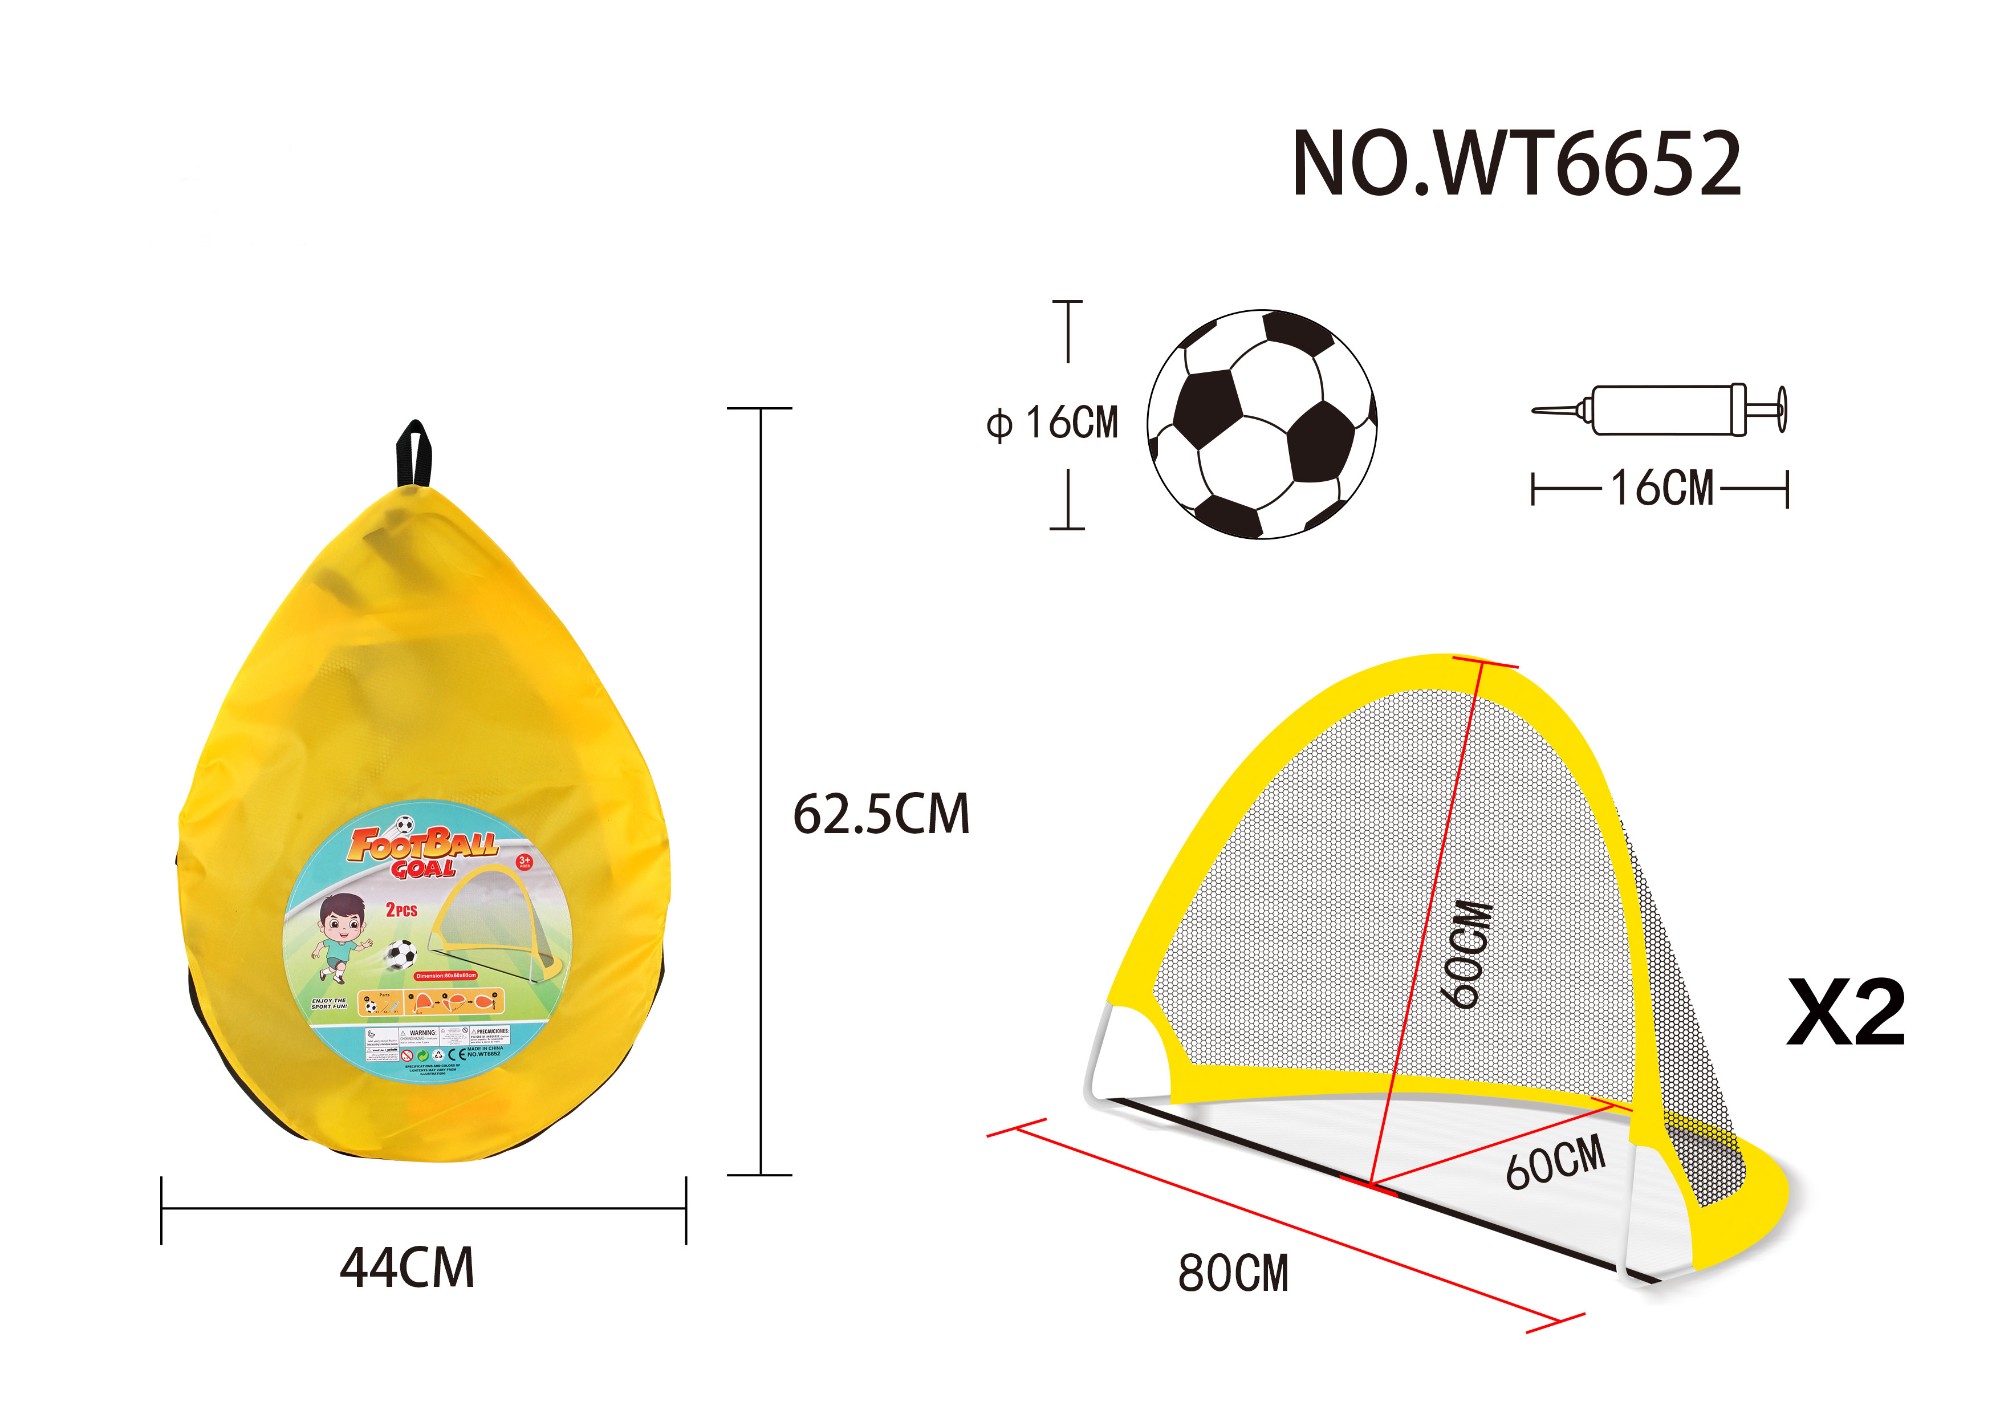 backpack folding football goal(middle size) Manufacturers, backpack folding football goal(middle size) Factory, Supply backpack folding football goal(middle size)